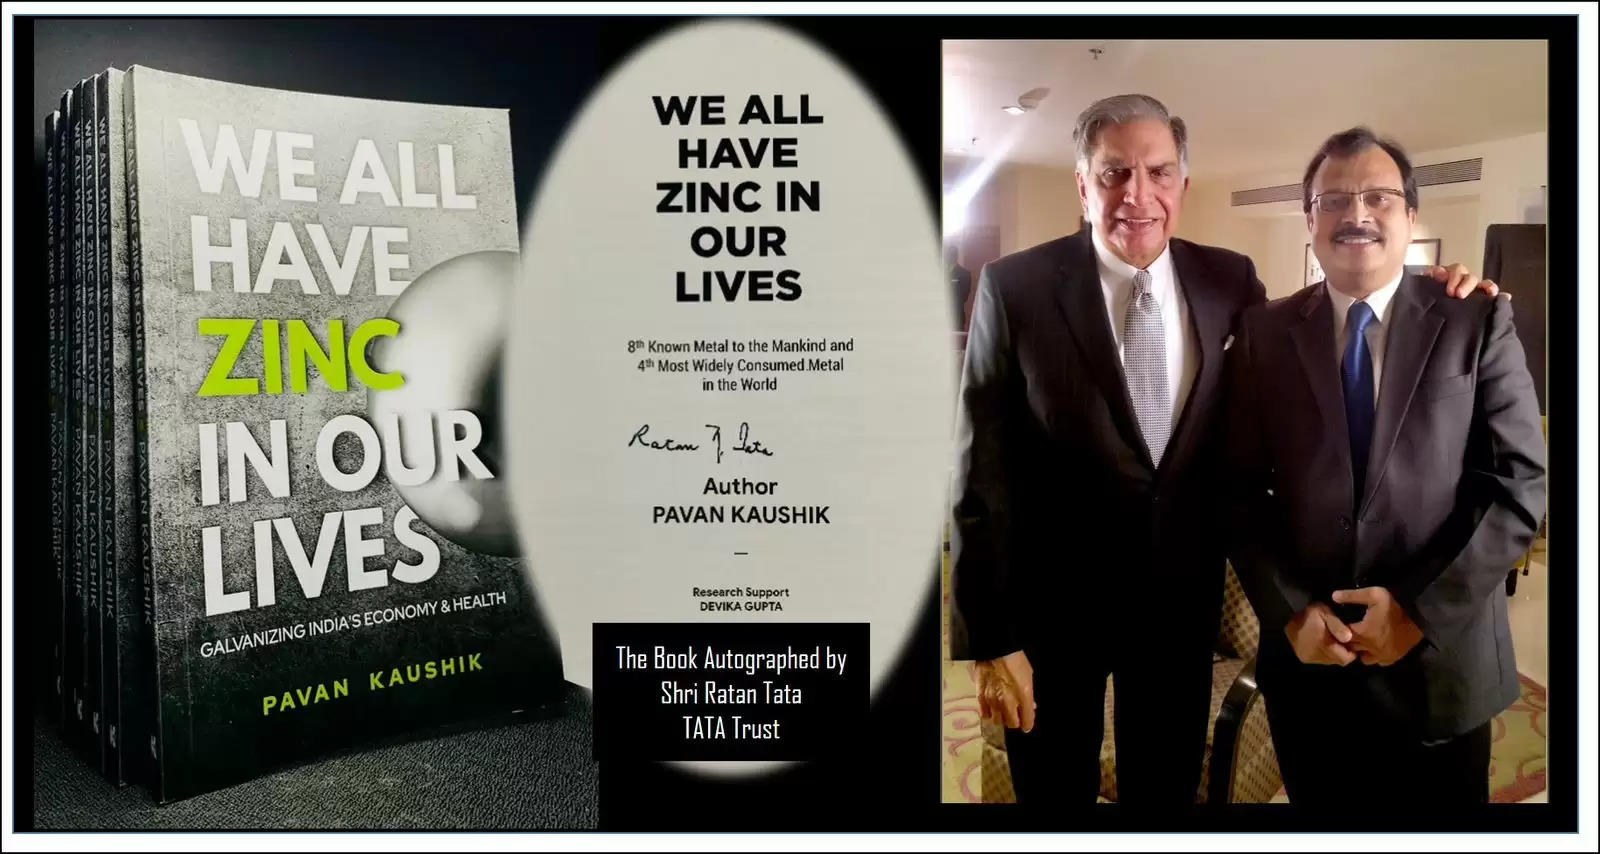 We All Have Zinc in Our Lives – Galvanizing India’s Economy & Health Pavan Kaushik Autographed by Ratan Tata